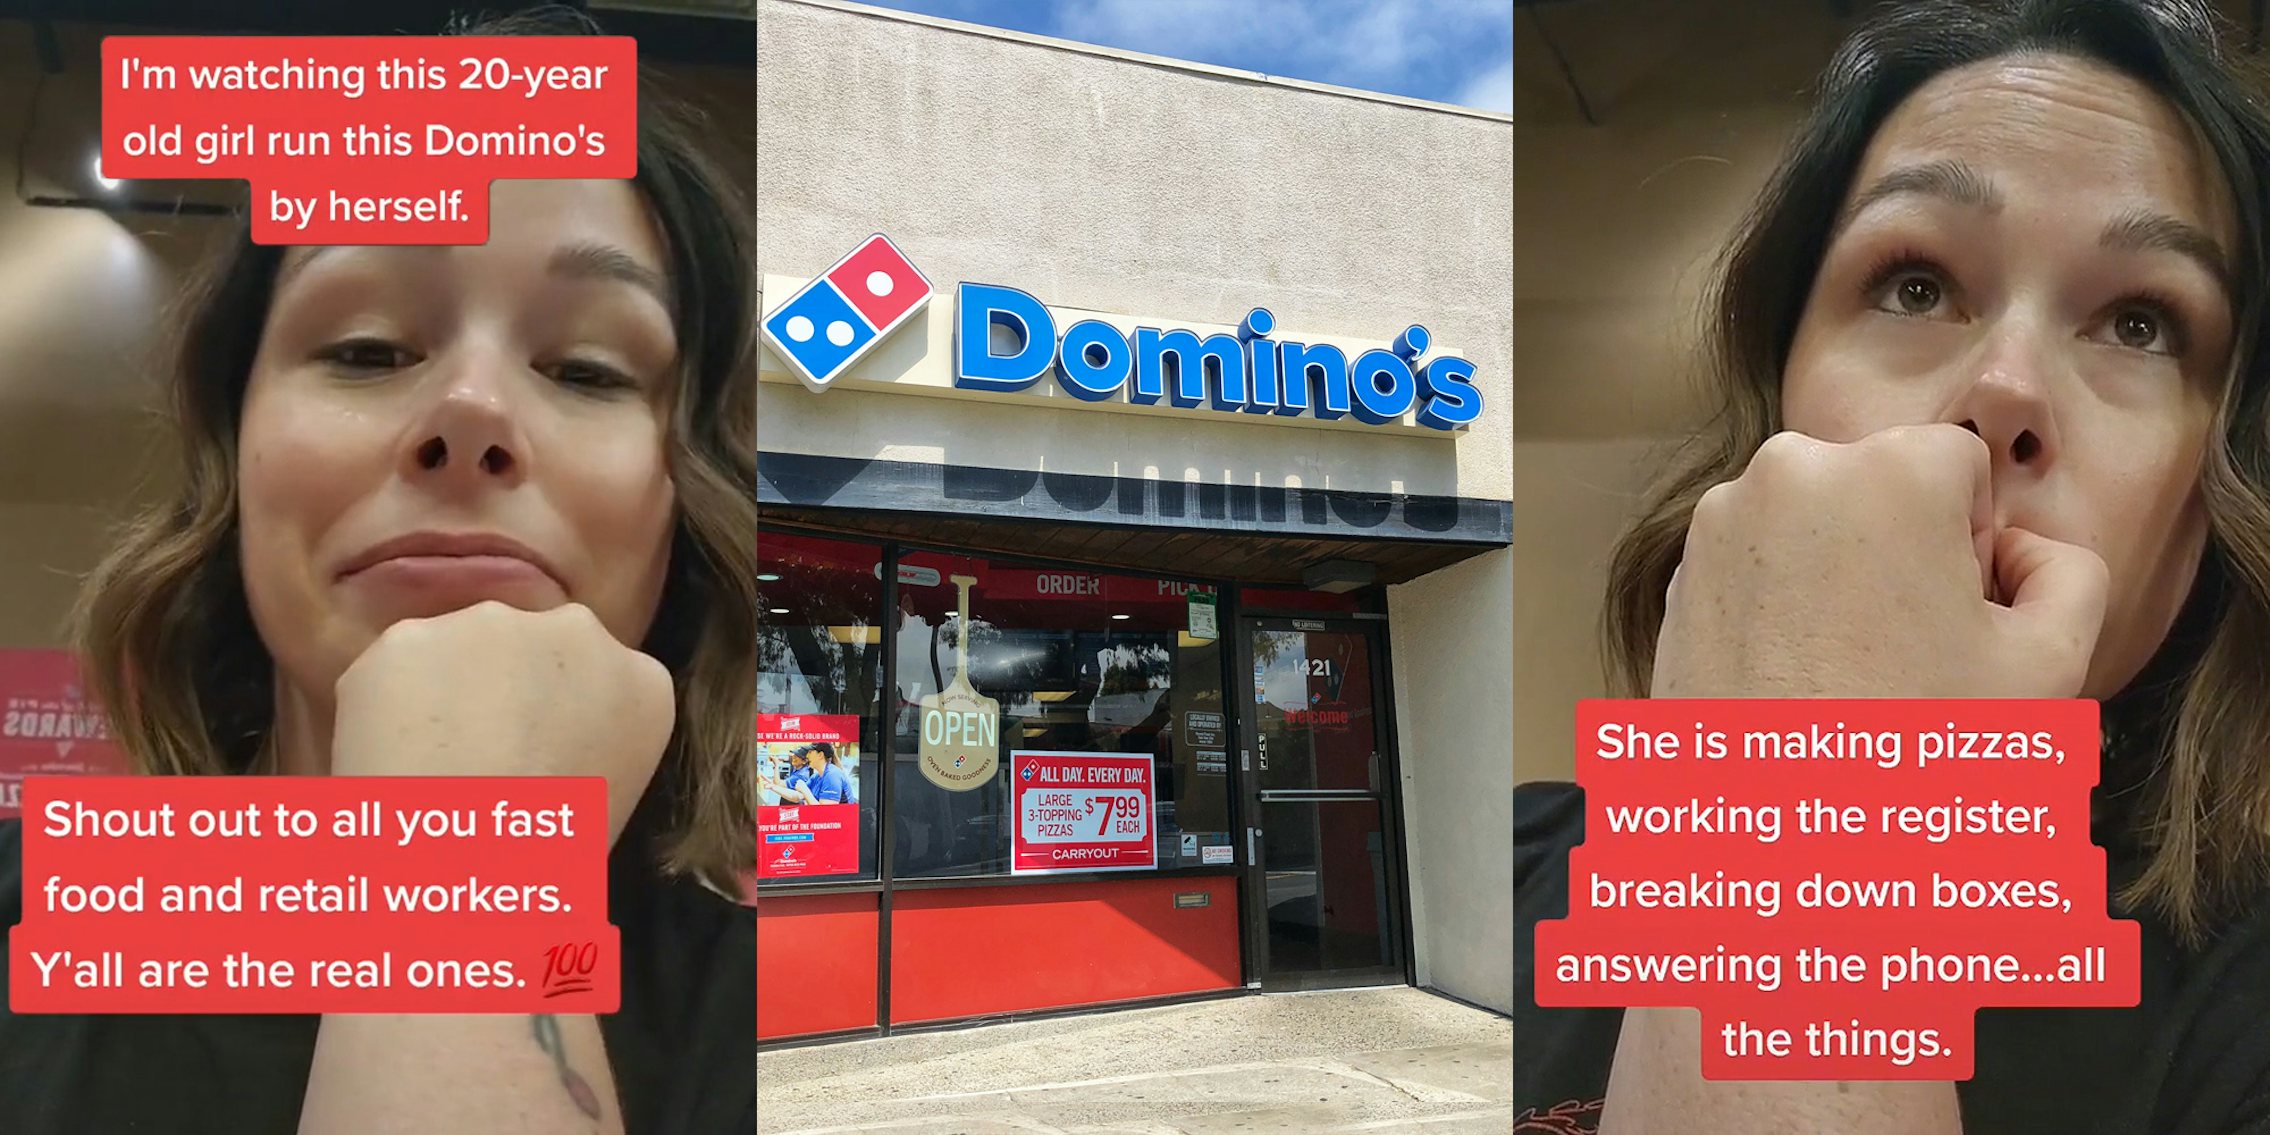 woman chin in hand caption 'I'm watching this 20-year old girl run this Domino's by herself. Shout out to all you fast food and retail workers. Y'all are the real ones' (l) Domino's building with sign outside (c) woman hand over mouth caption 'She is making pizzas, working the register, breaking down boxes, answering the phone... all the things.' (r)